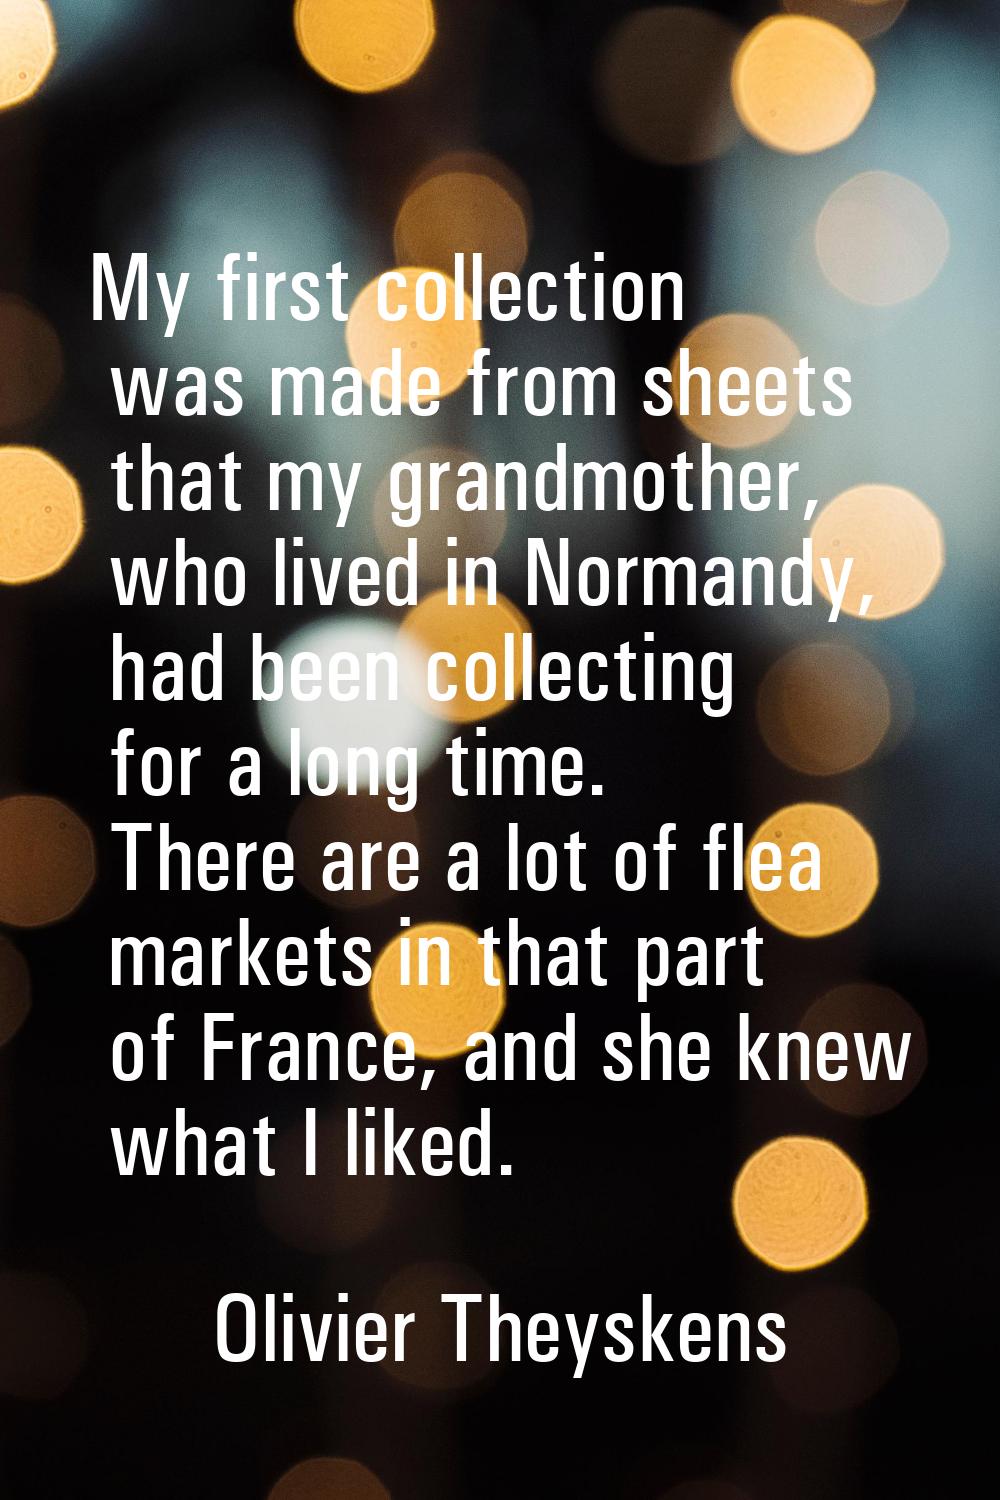 My first collection was made from sheets that my grandmother, who lived in Normandy, had been colle